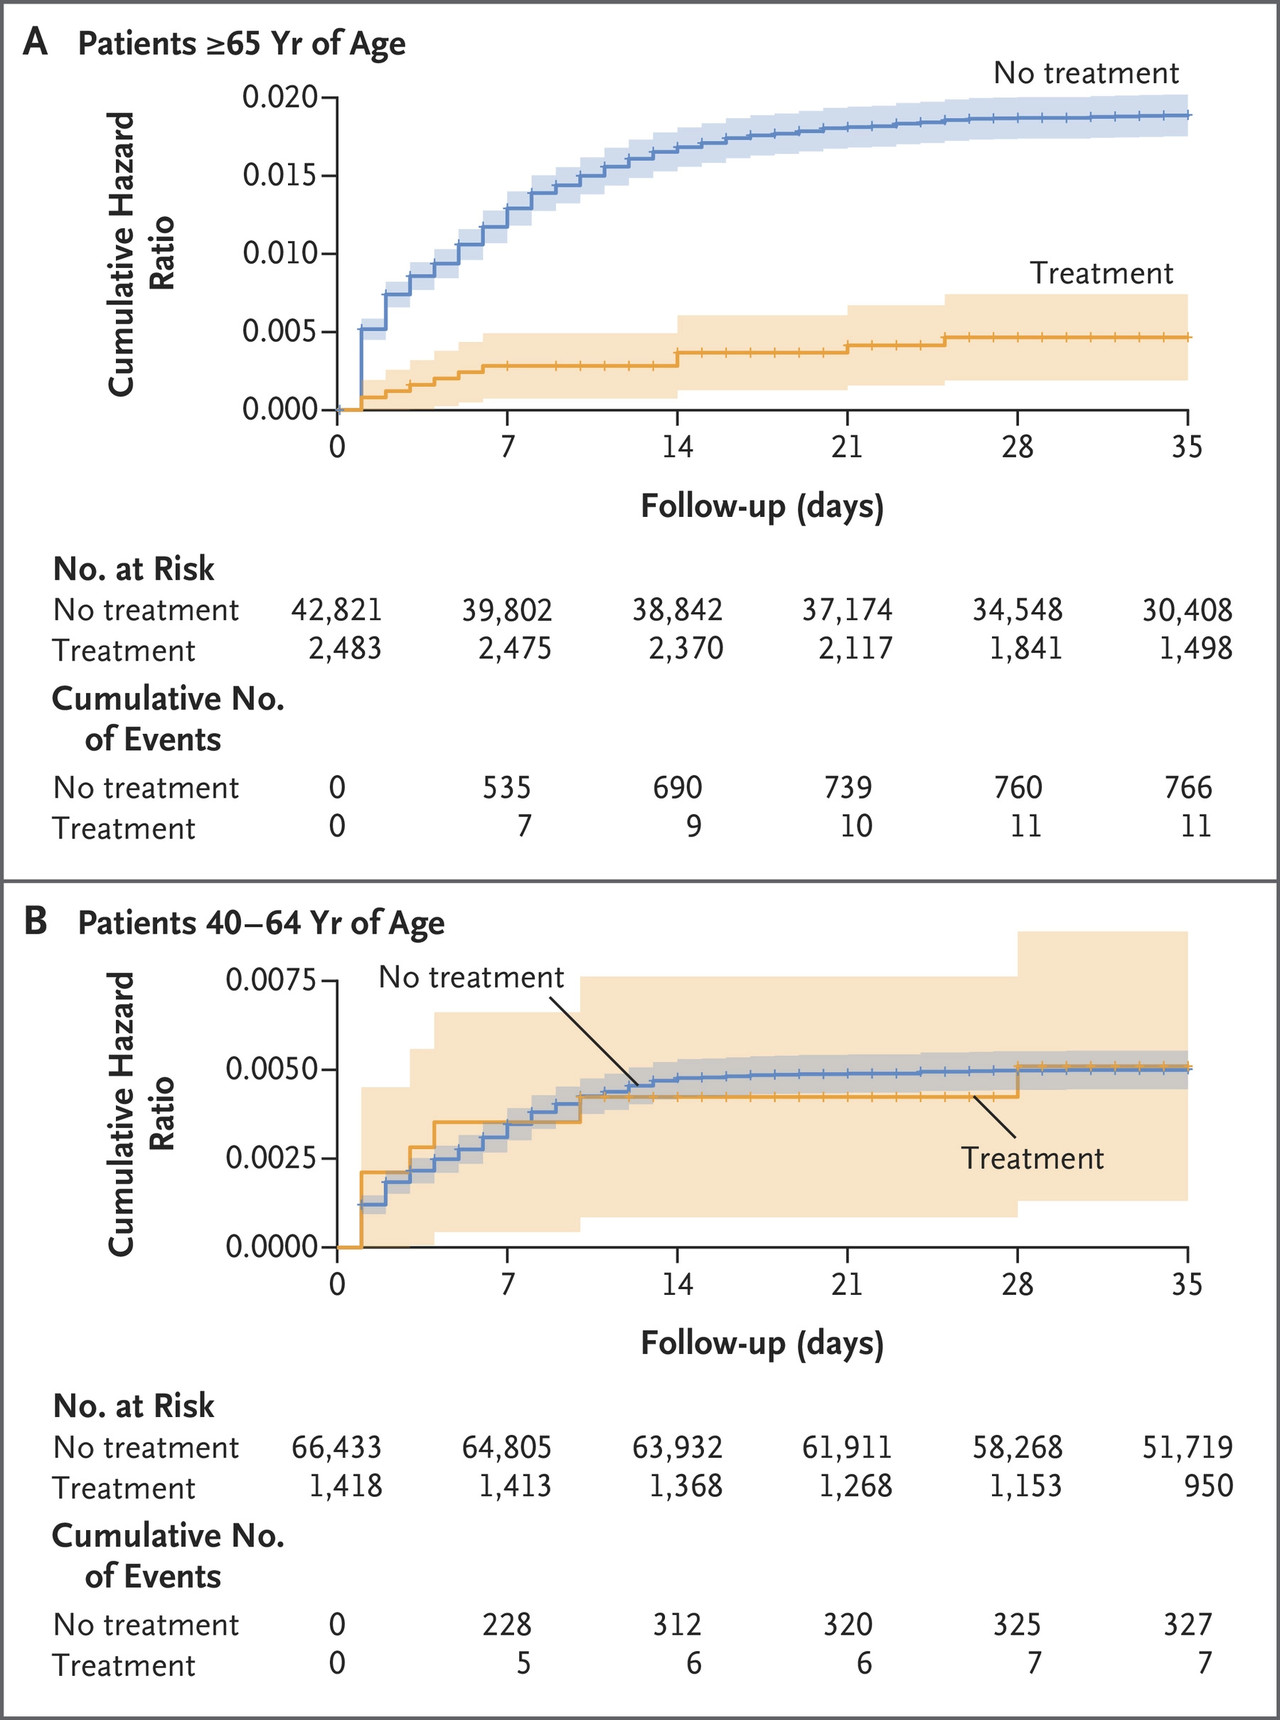 Cumulative Hazard Ratio for Hospitalization Due to Covid-19, According to Age Group and Treatment Status(자료 출처: NEJM).